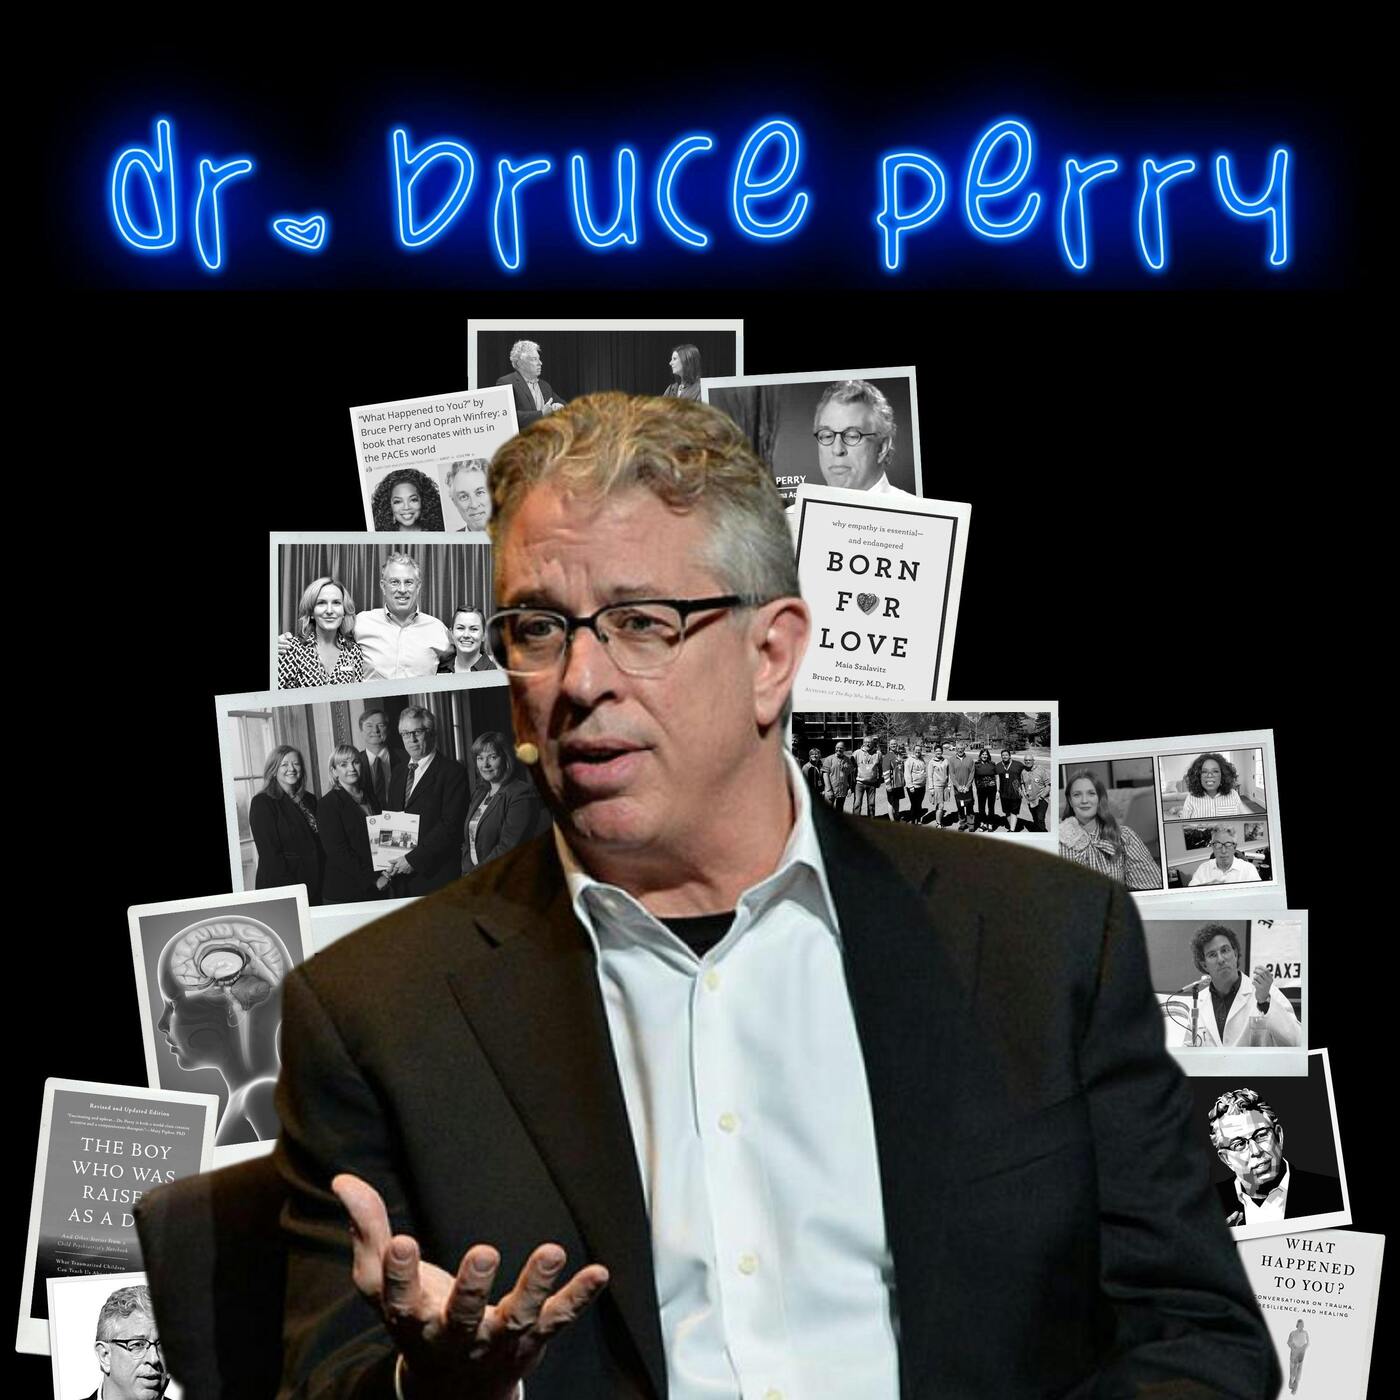 Vulnerable EP58: The Child Actor Crisis with Dr. Bruce Perry